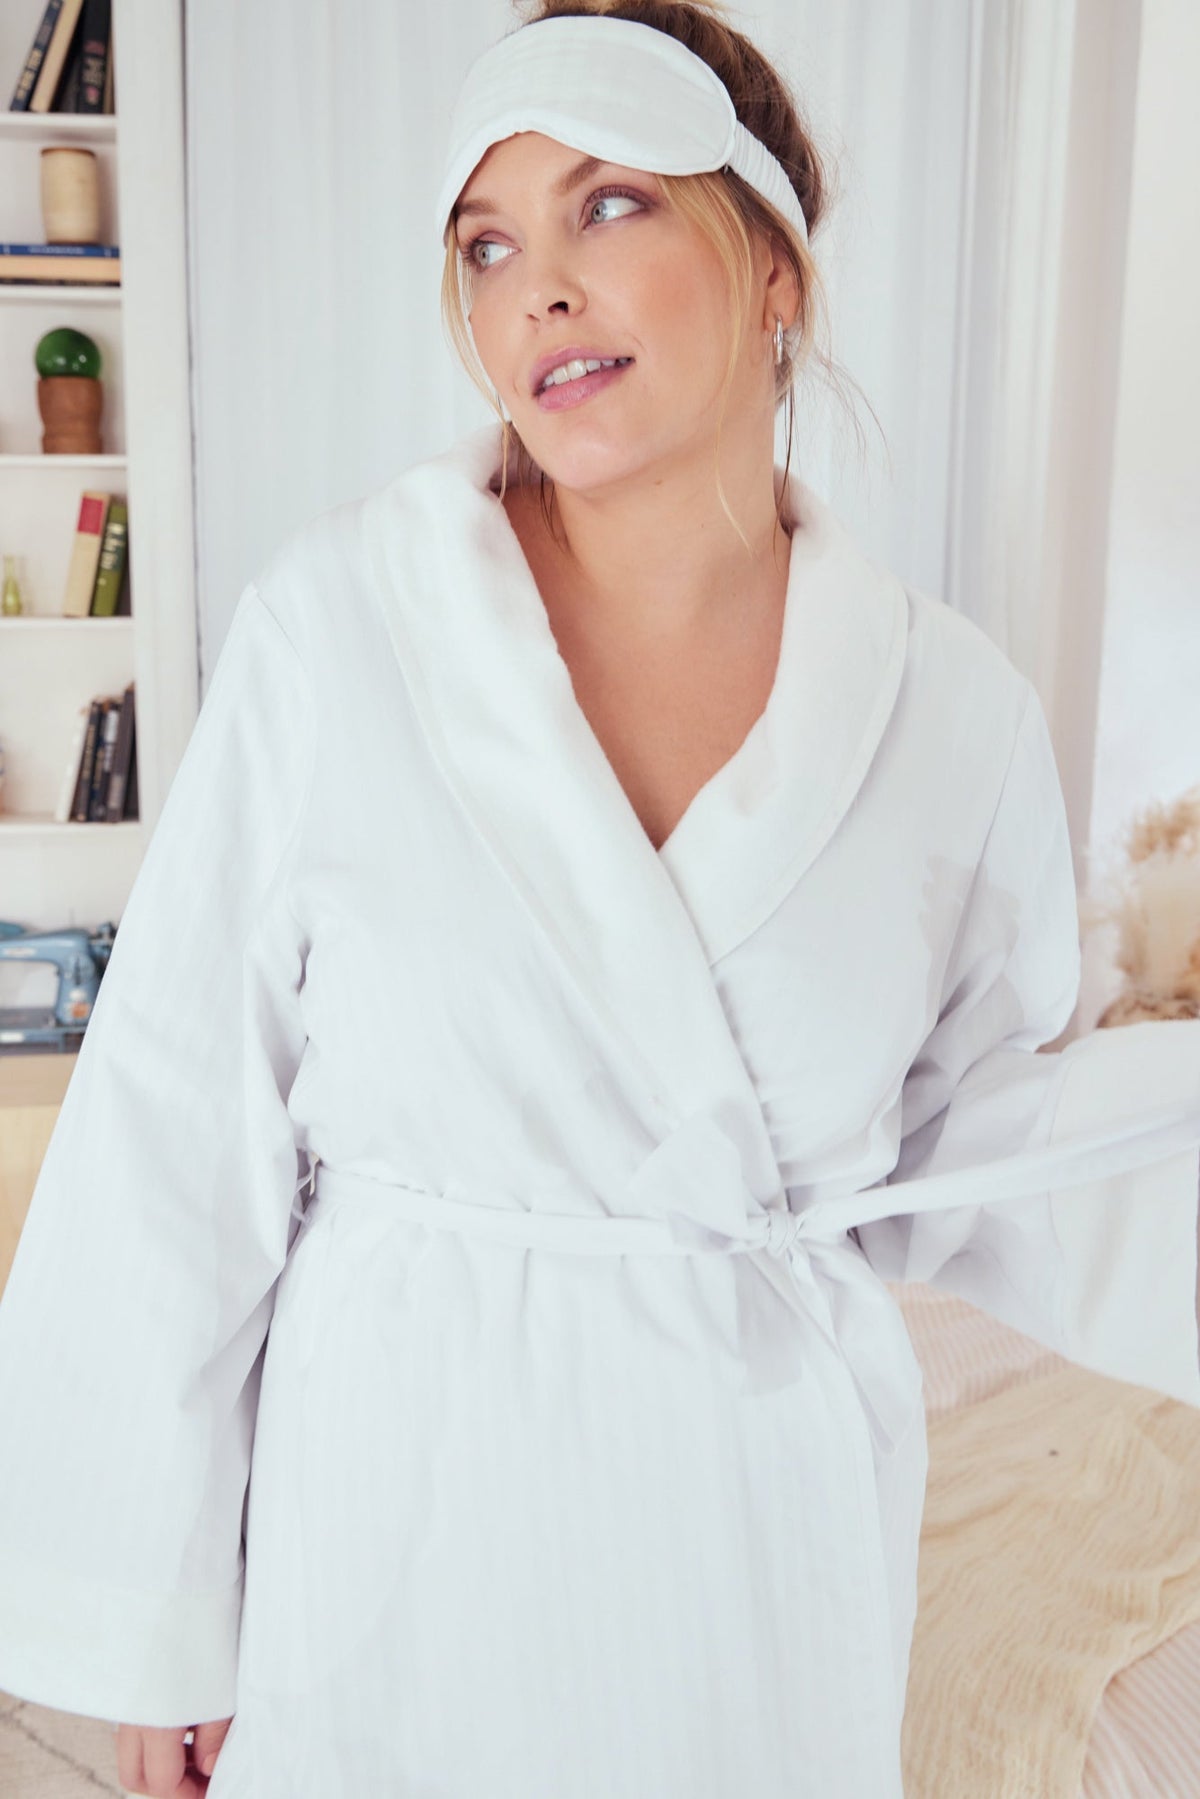 Upper body of A lady wearing plus size white robe with stripes